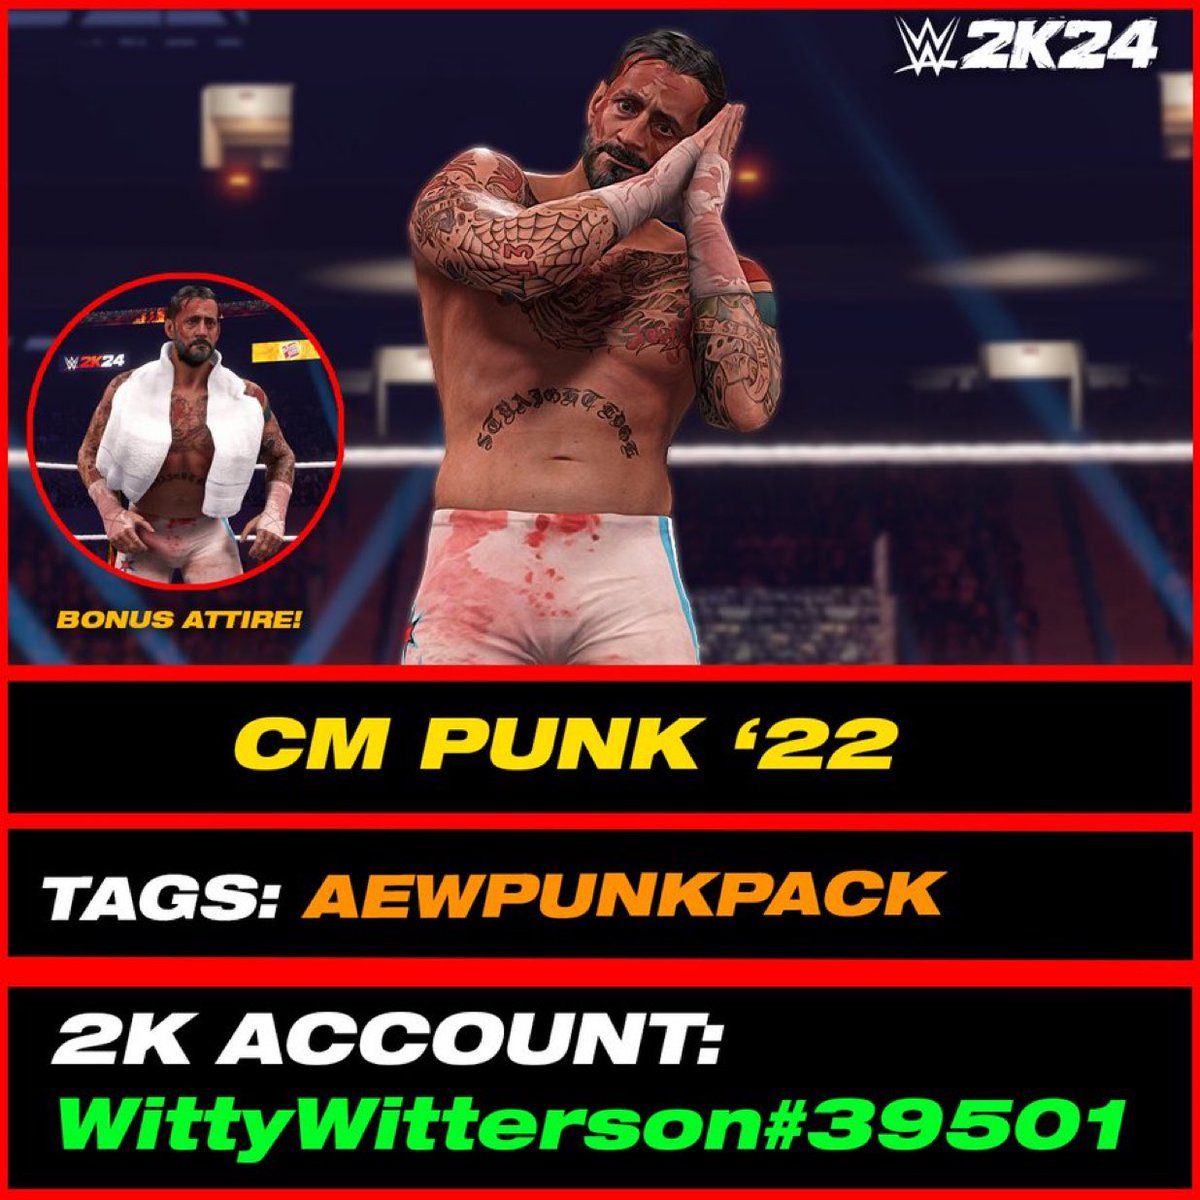 CM Punk All Out '22 (In-Game Edit) is uploaded onto Community Creations #WWE2K24 •Tags: AEWPUNKPACK, WITTY226, PETCHY •Collab: @PETCHYcreations •Attire: @GameVolt1 INCLUDES: • 'CM Punk' Call Name • Commentary • Accurate Tattoos & Blood • Via: @WittyWitterson